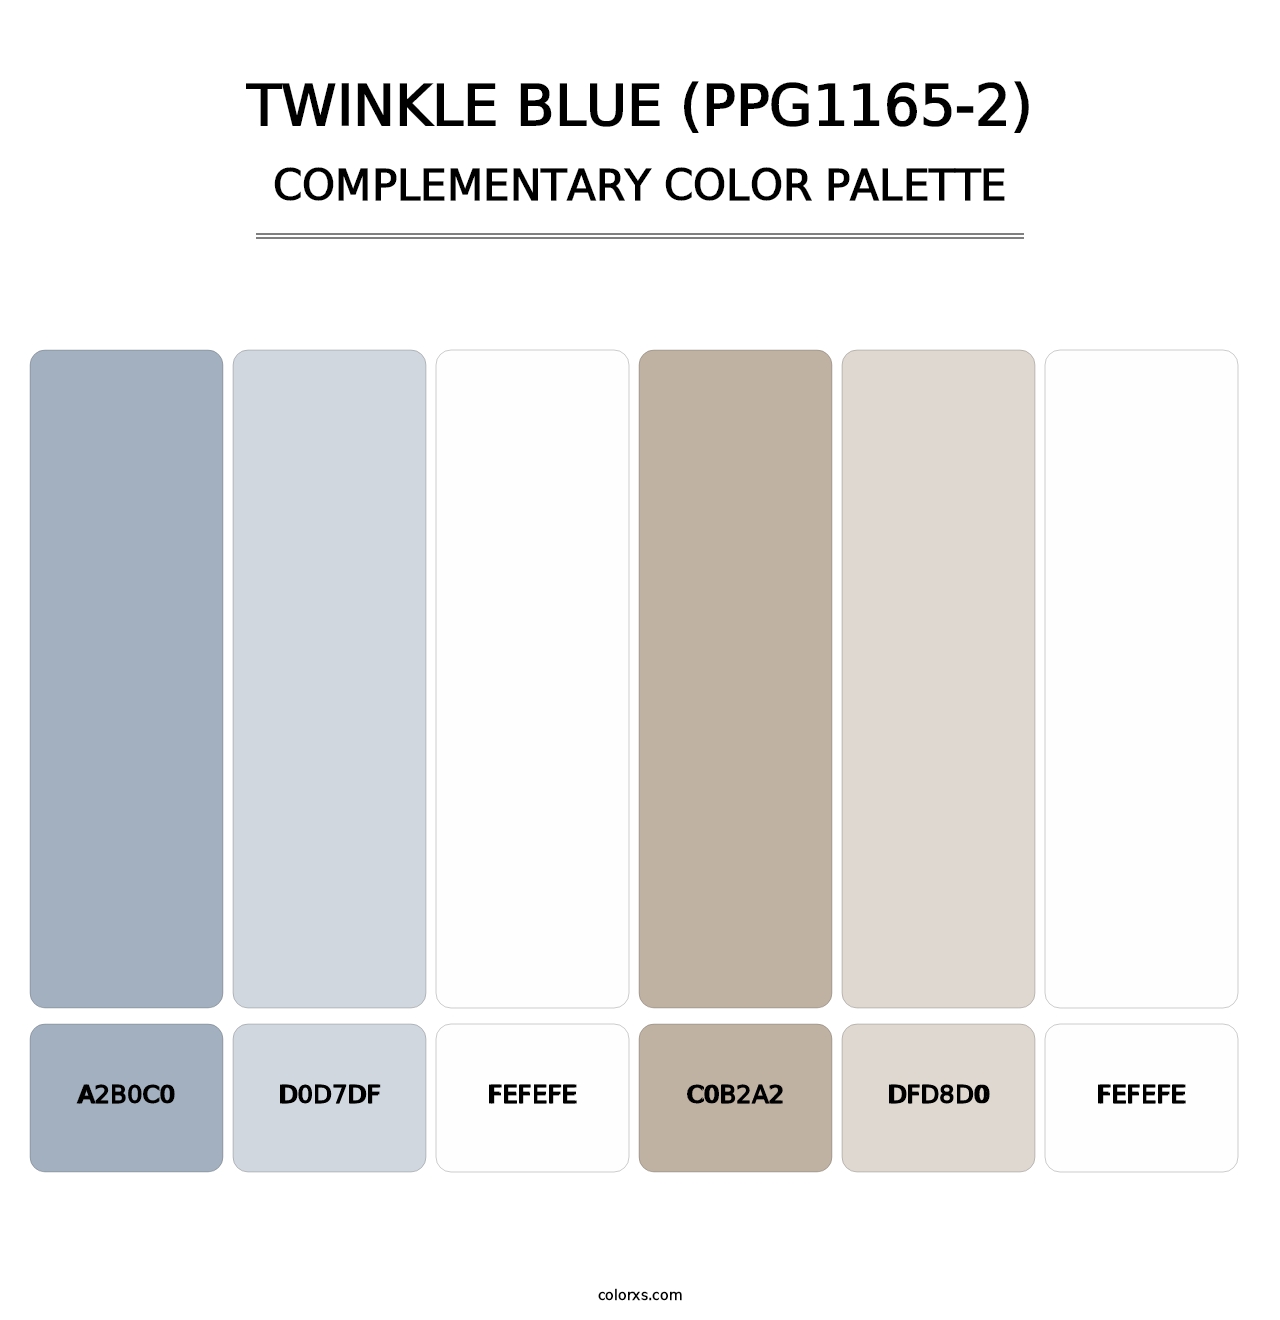 Twinkle Blue (PPG1165-2) - Complementary Color Palette